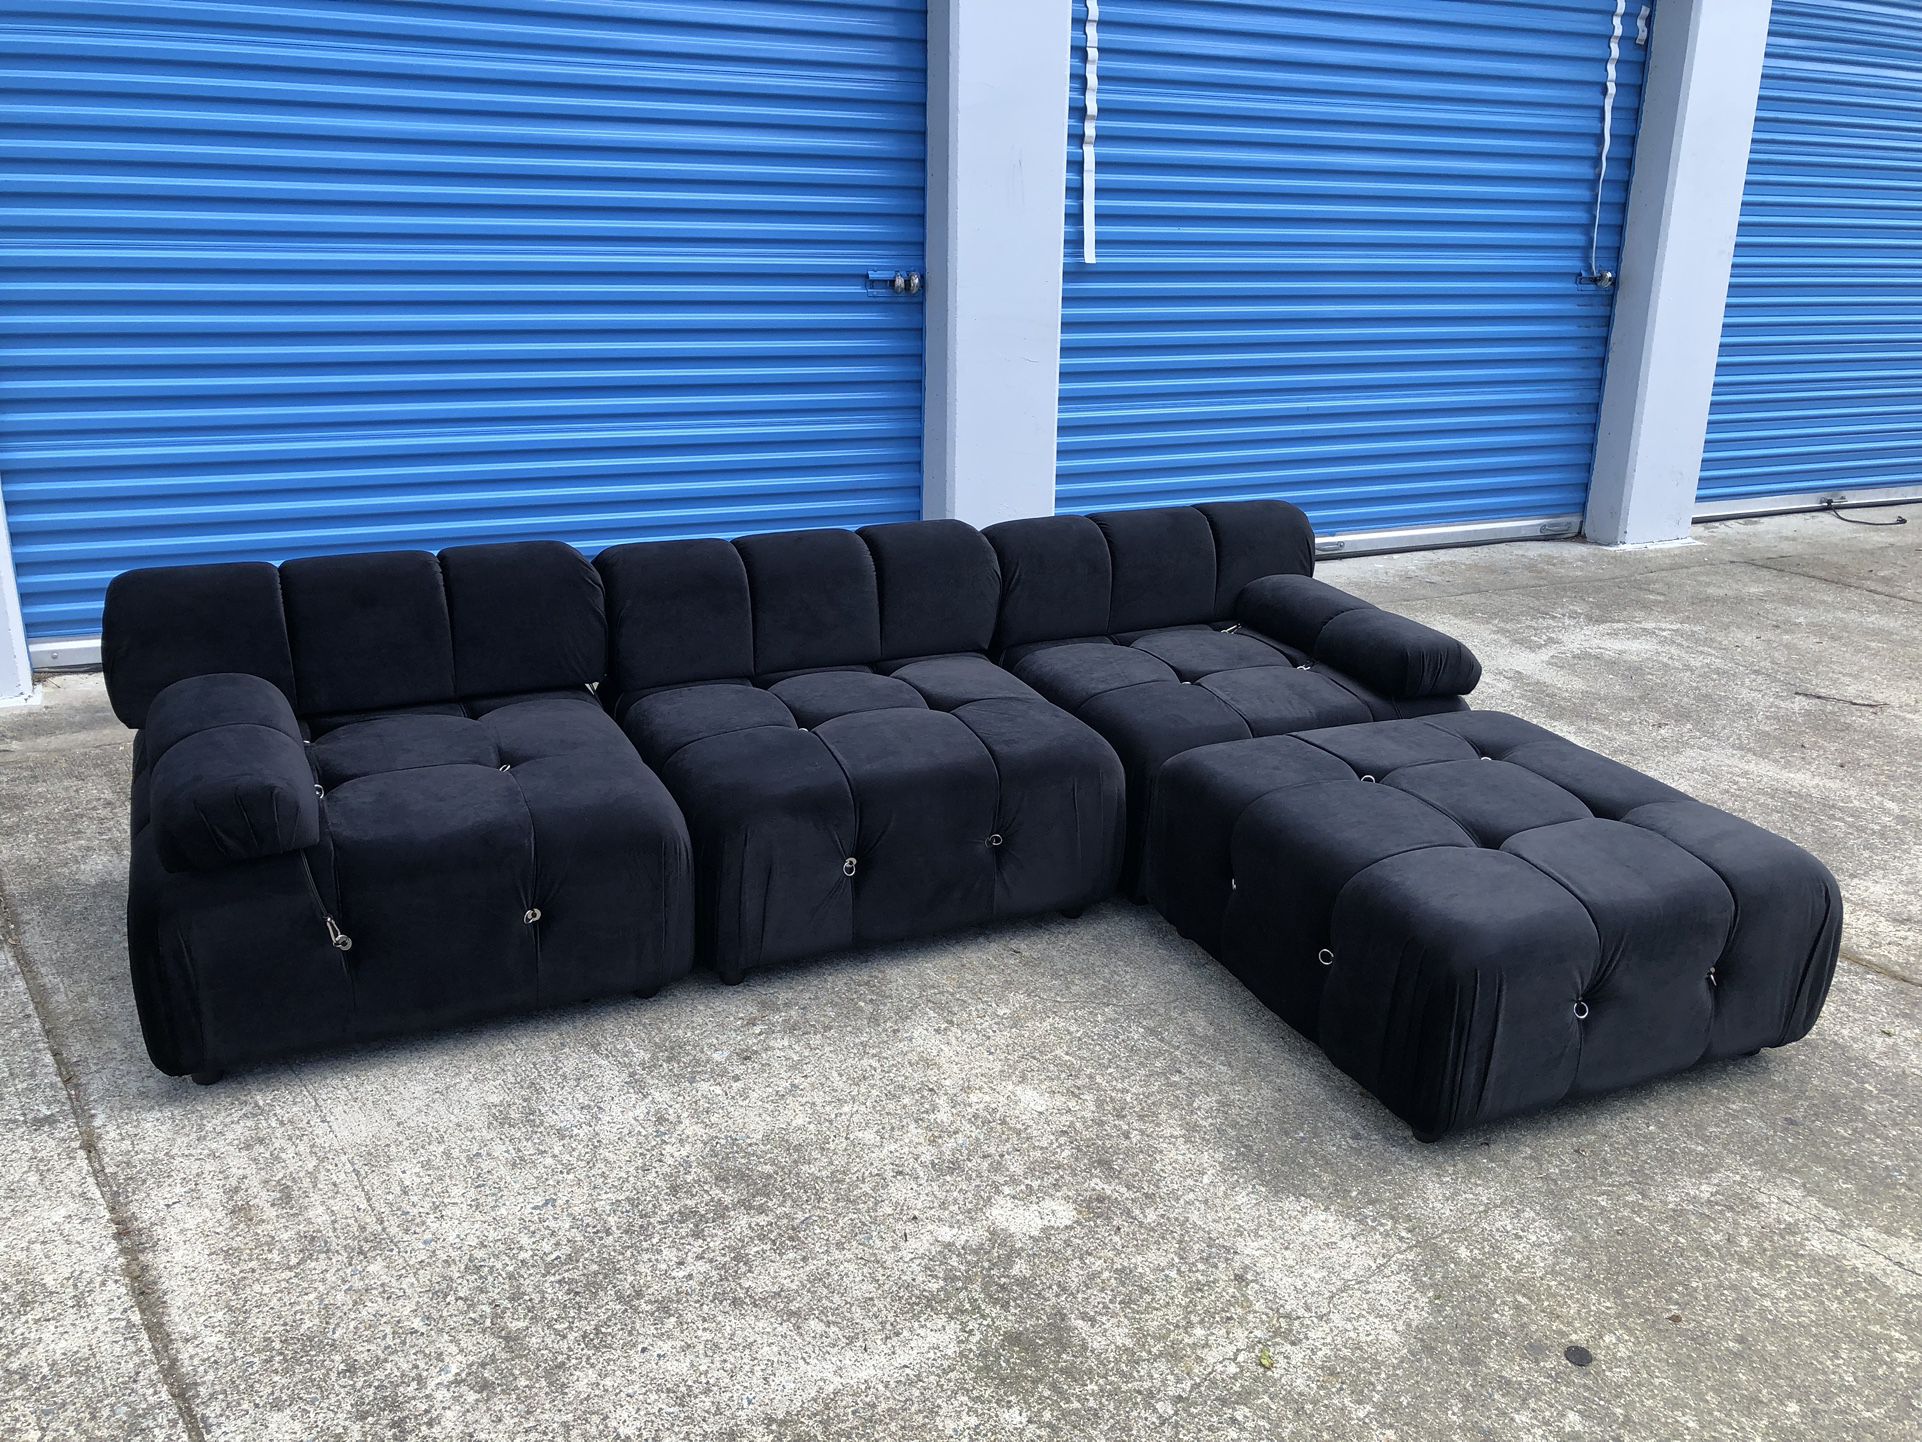 FREE DELIVERY- Brand New Mario Bellini Black Velvet Modular Sectional Couch